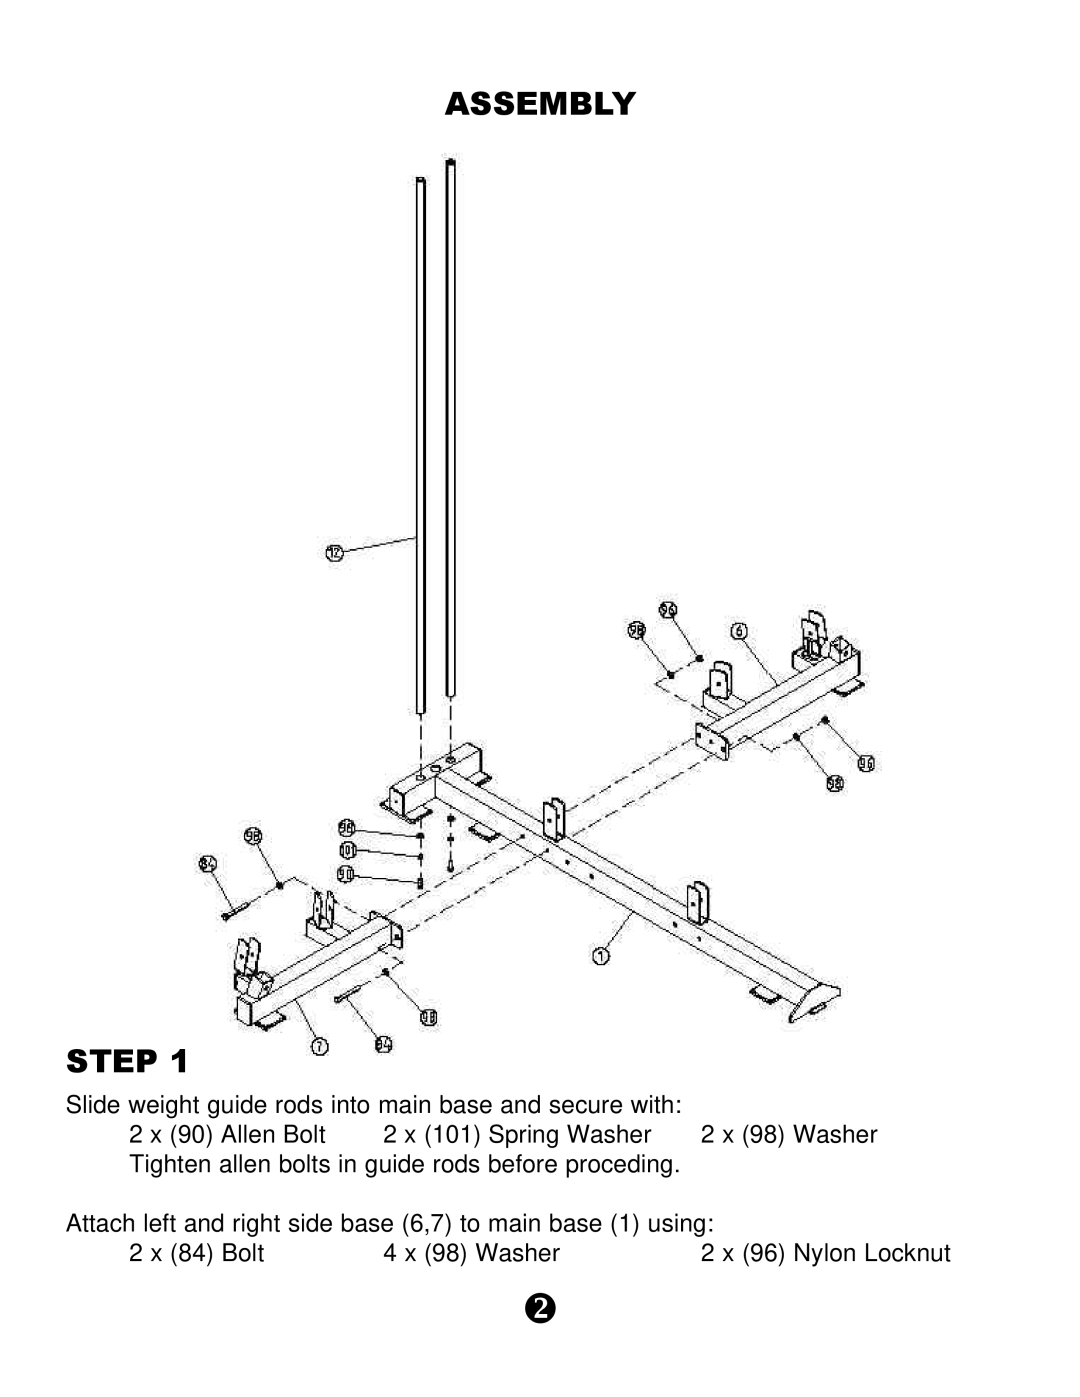 Keys Fitness KPS-CG Assembly Step, Slide weight guide rods into main base and secure with, 2 x 84 Bolt, 4 x 98 Washer 